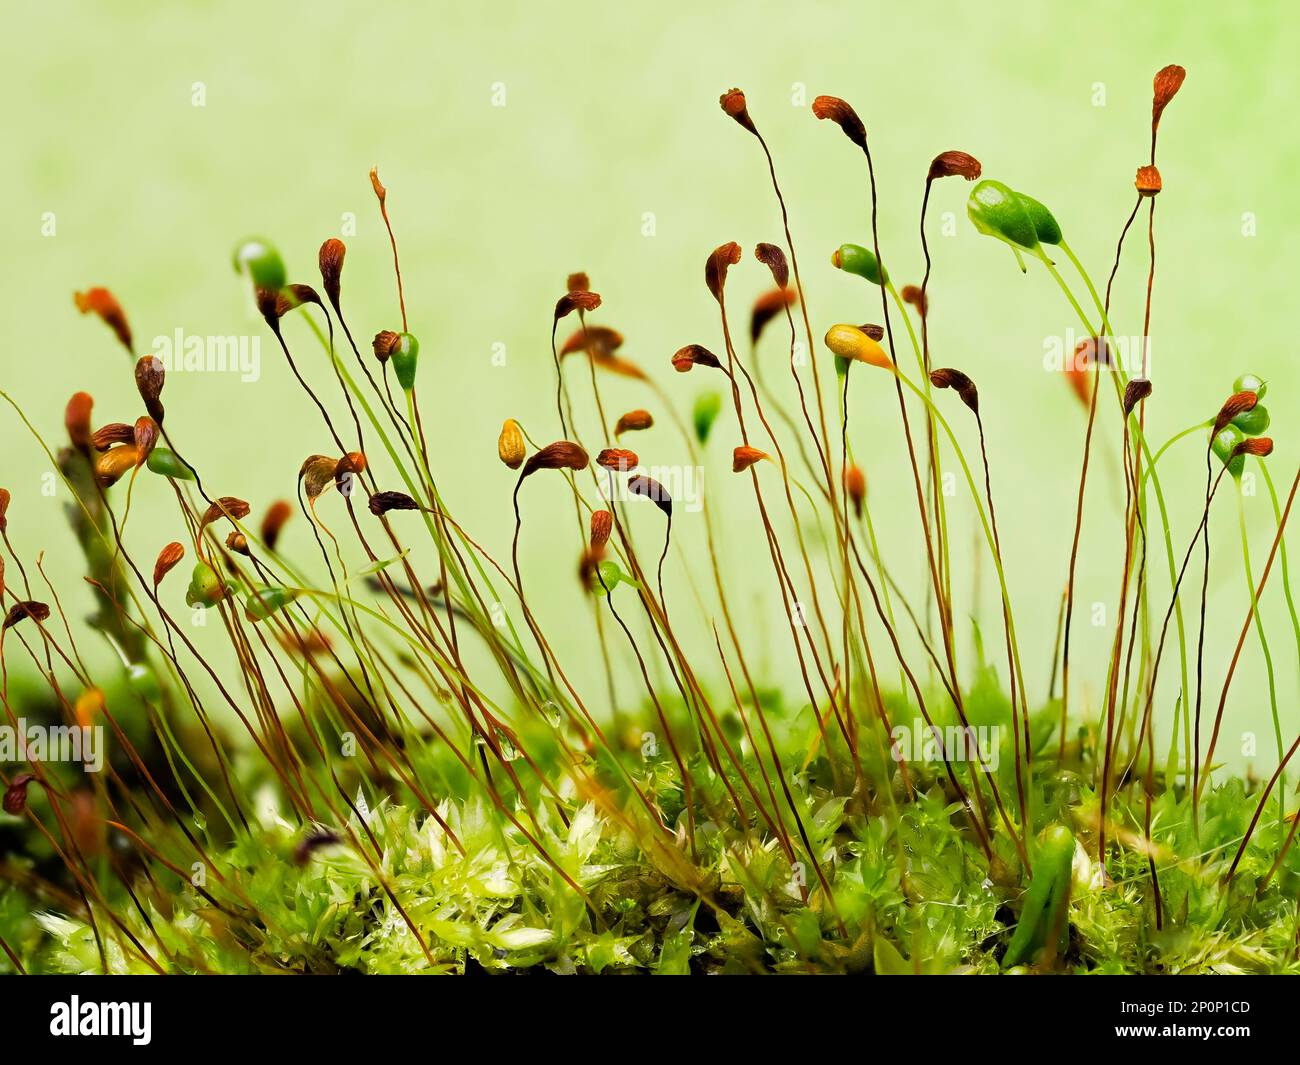 Seed heads off moss against a plain green background Stock Photo